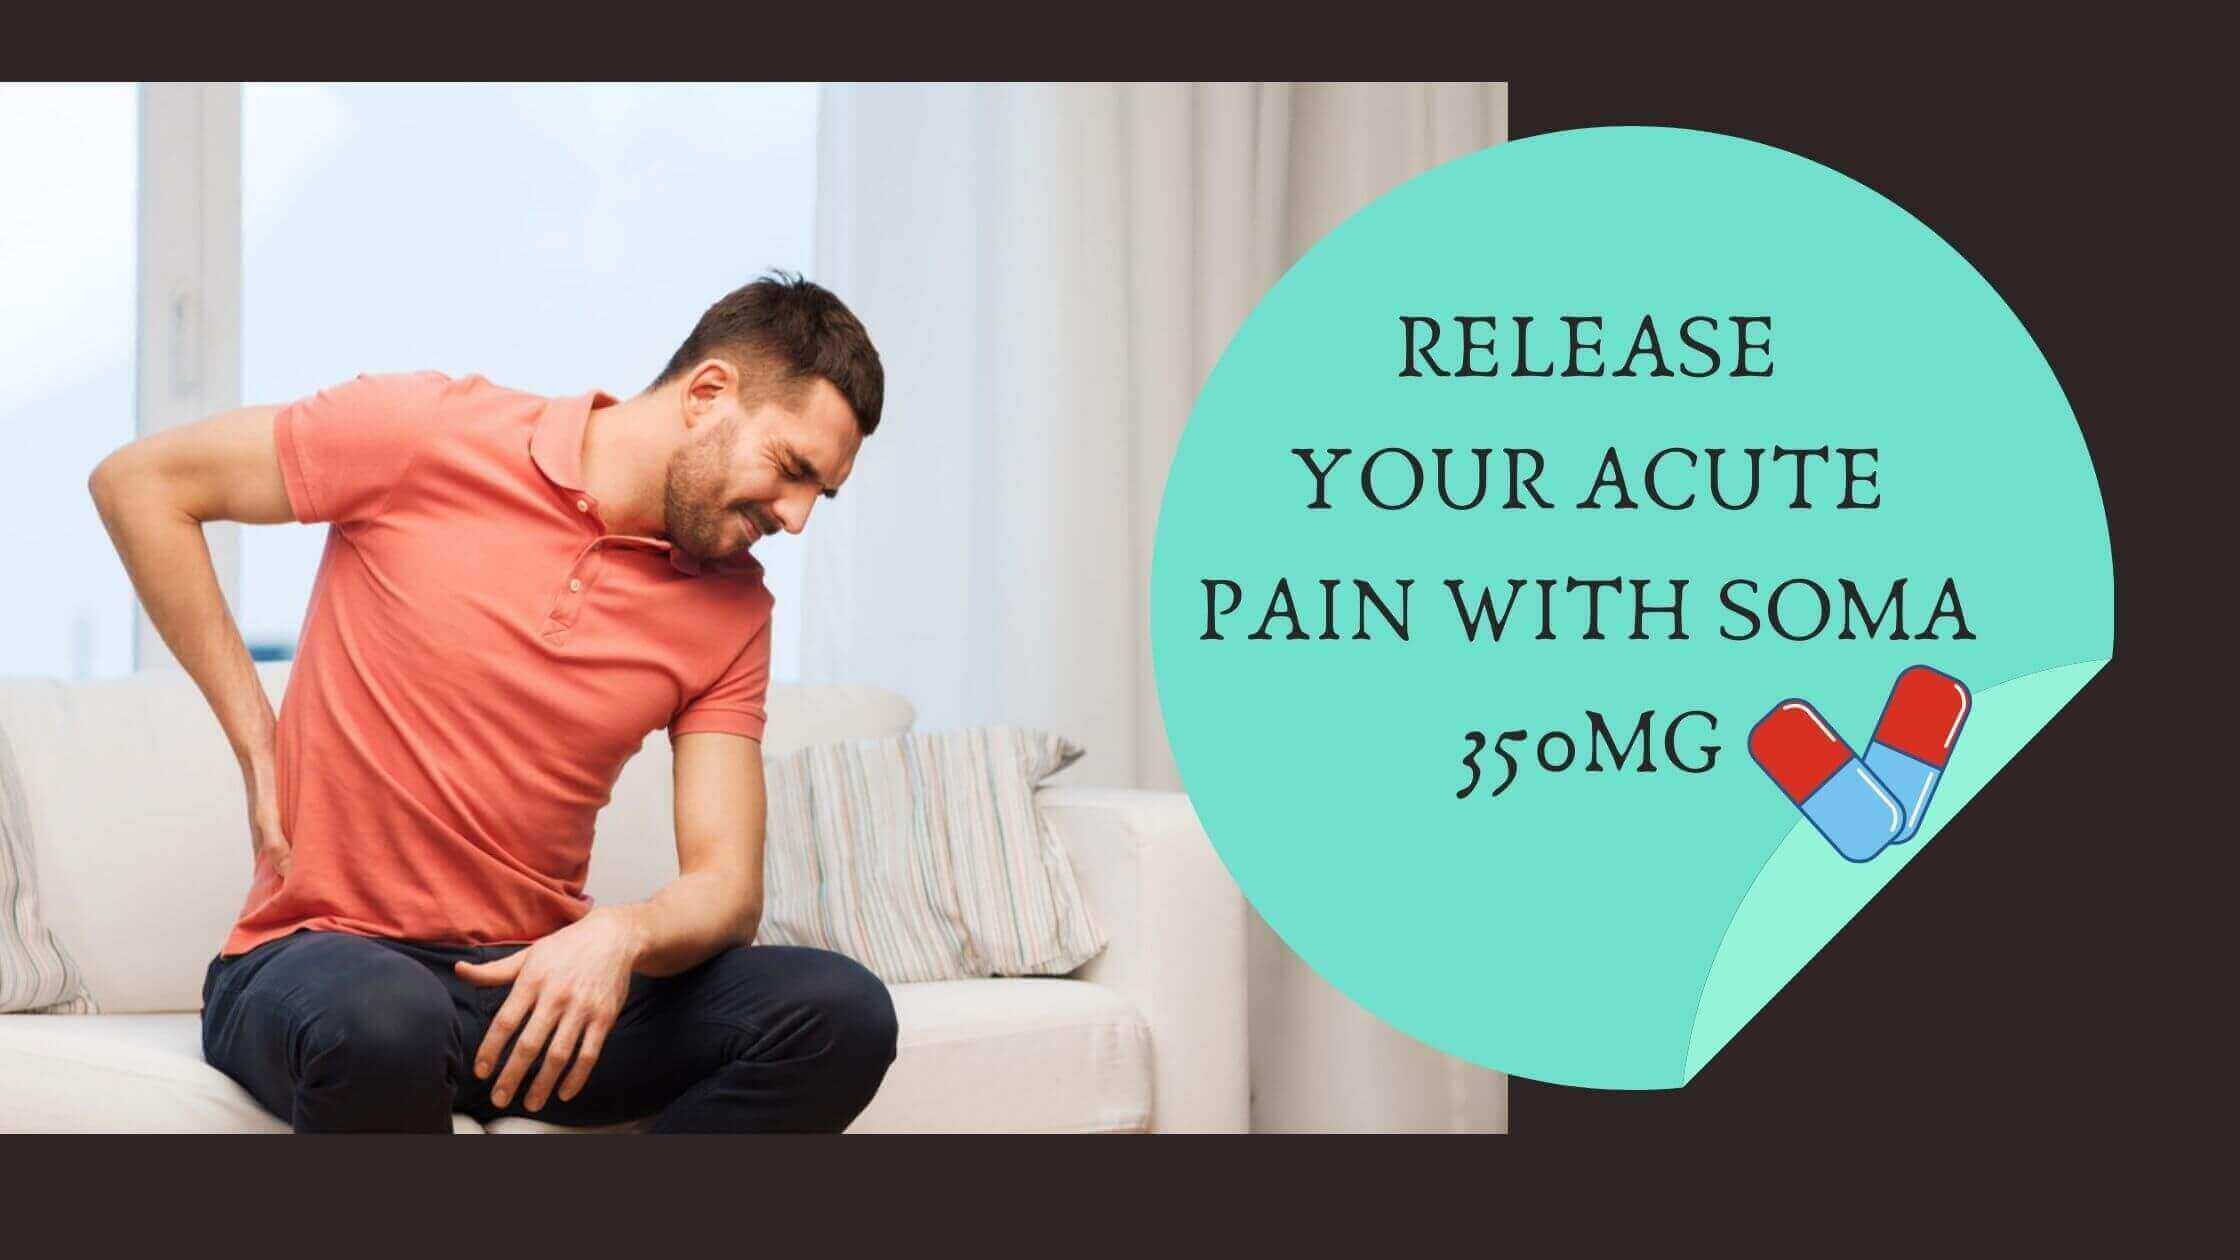 Release your acute pain with Soma 350mg